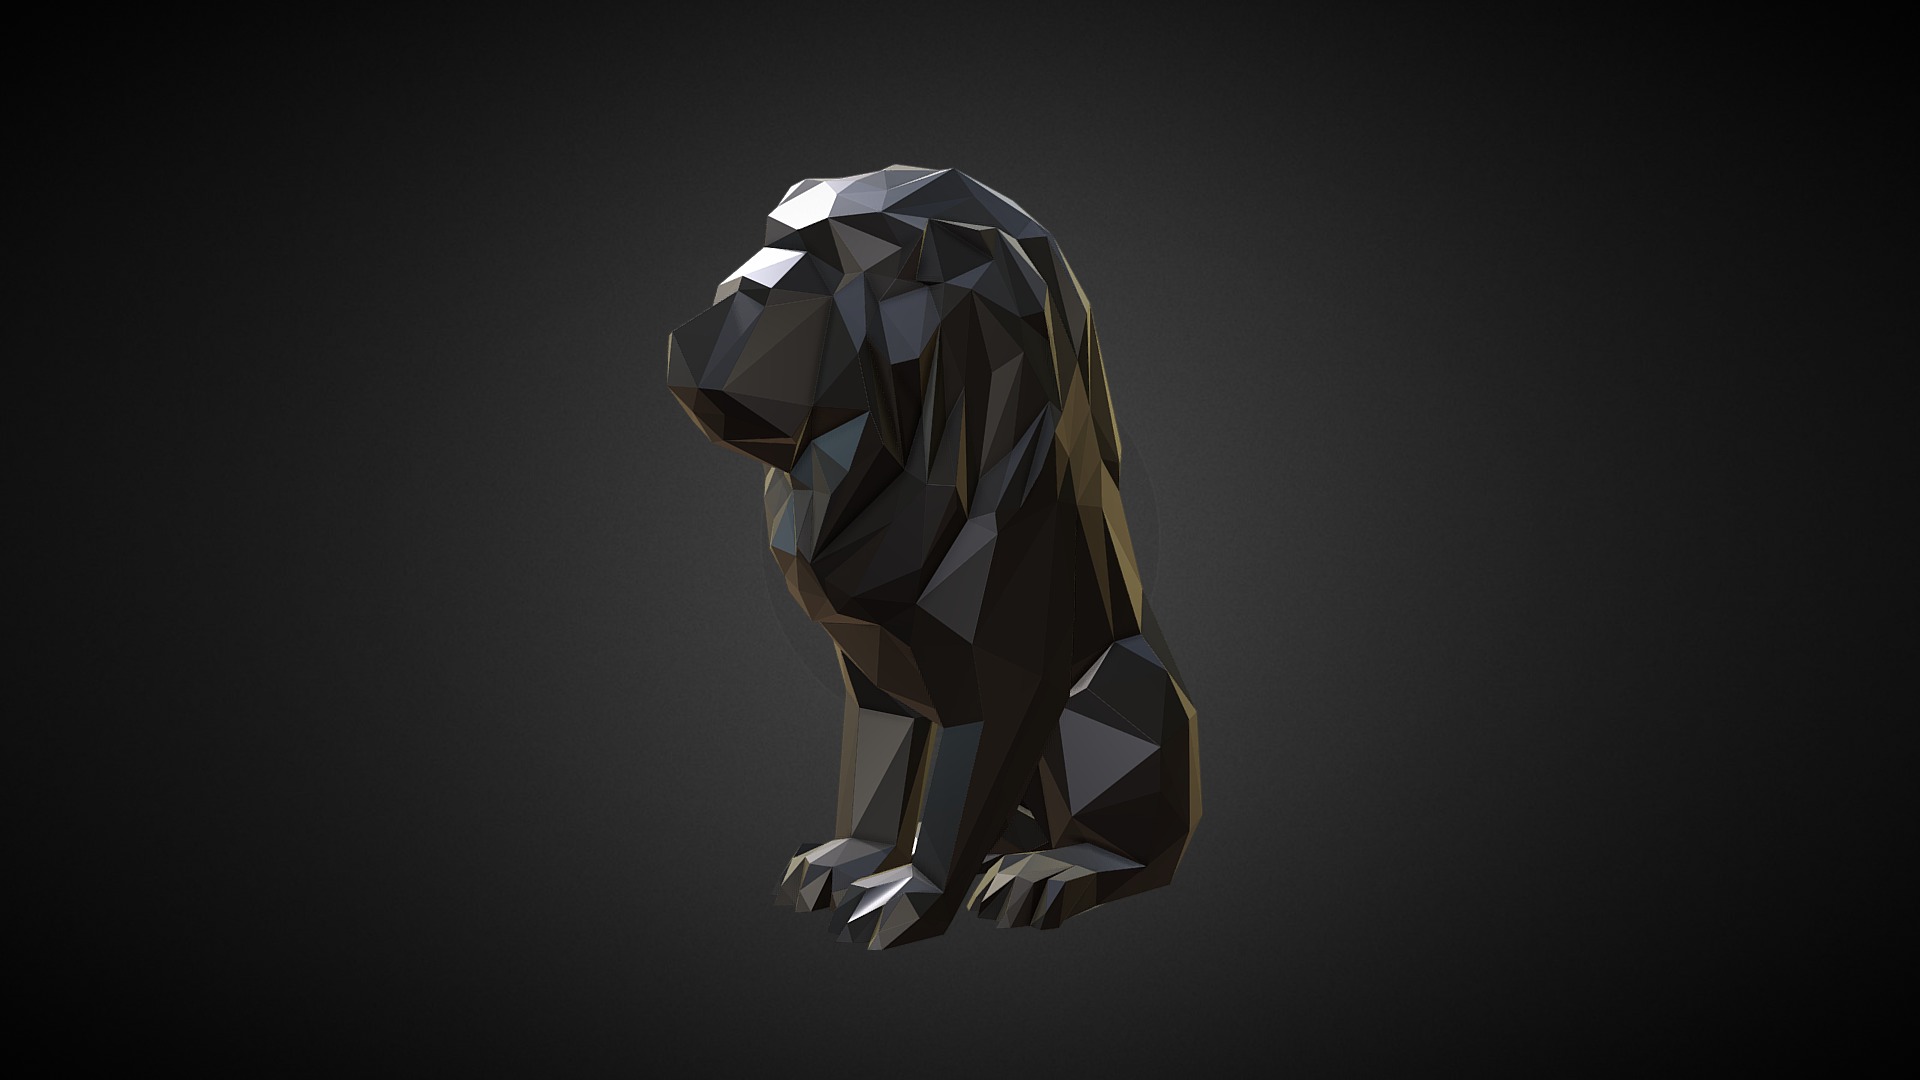 3D model Geometric Lion – Low-poly - This is a 3D model of the Geometric Lion - Low-poly. The 3D model is about a black and white design.